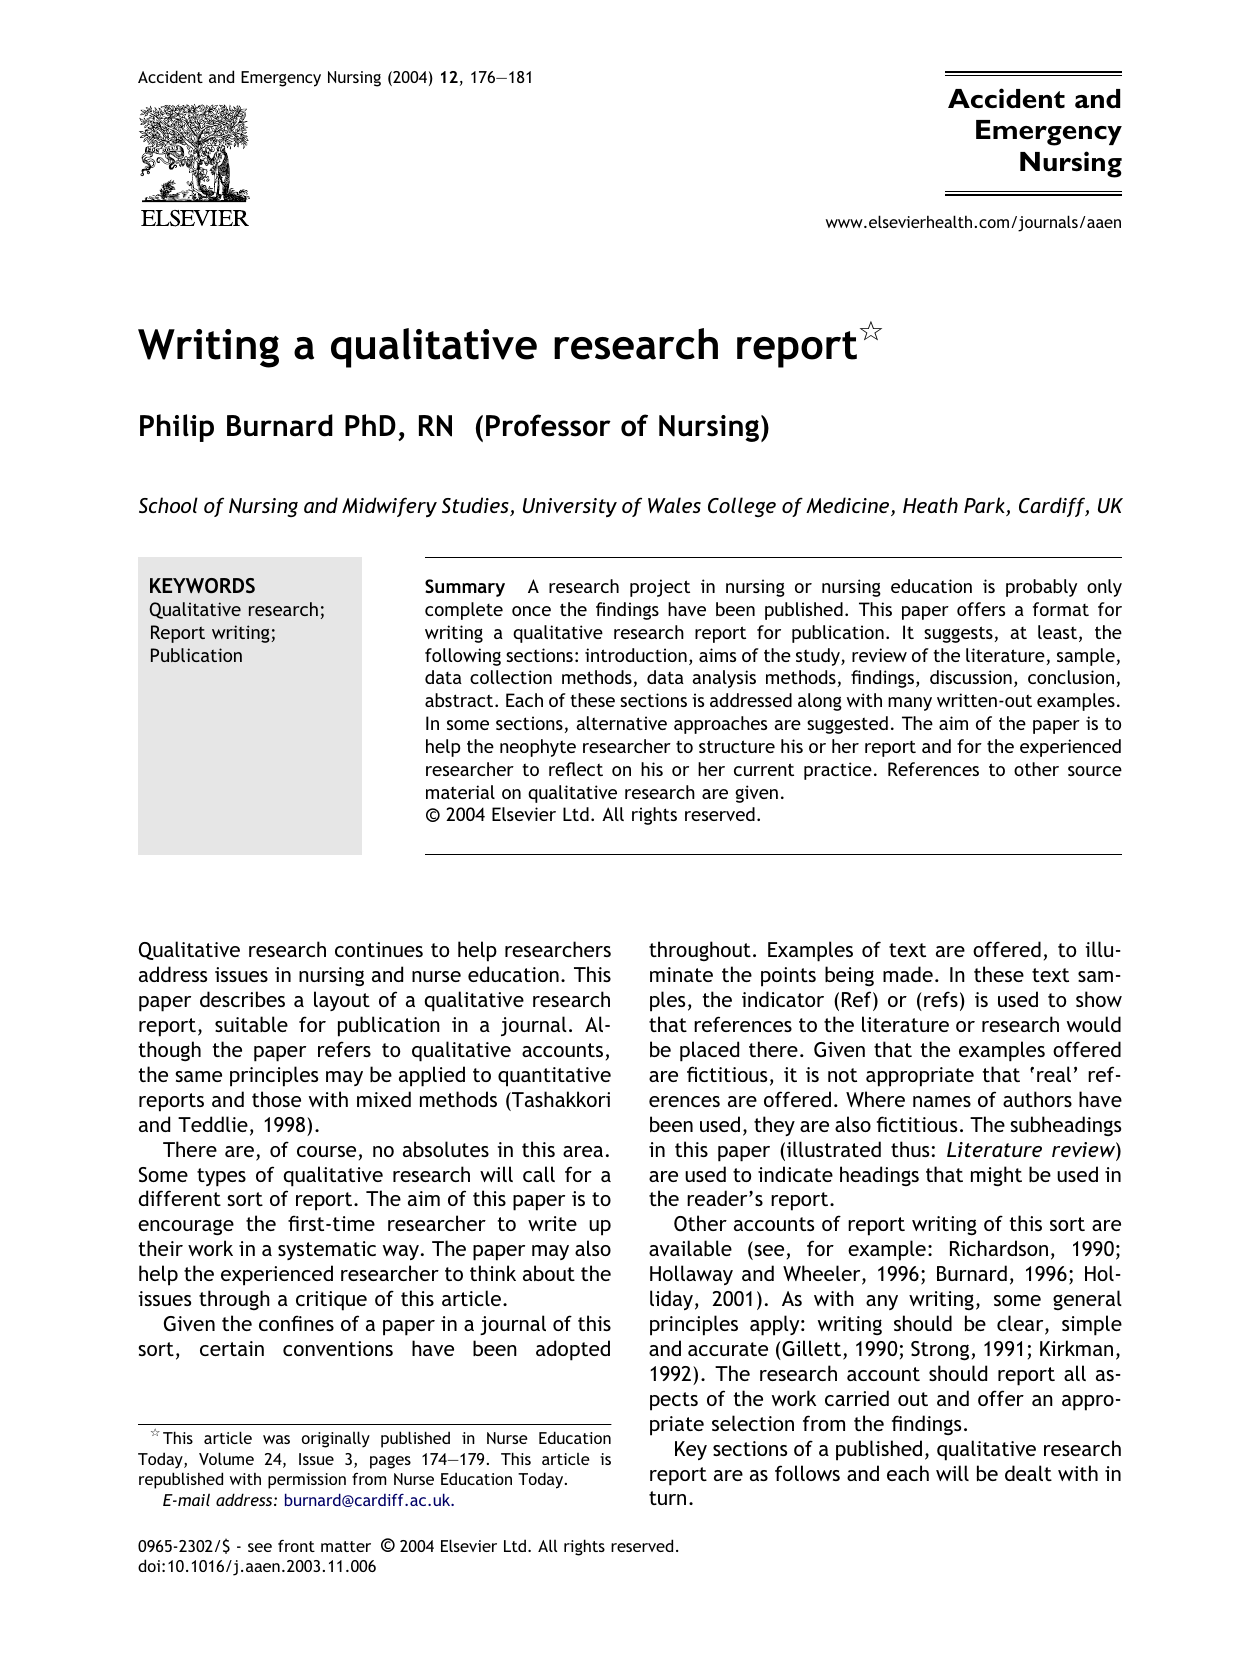 journal of healthcare qualitative research